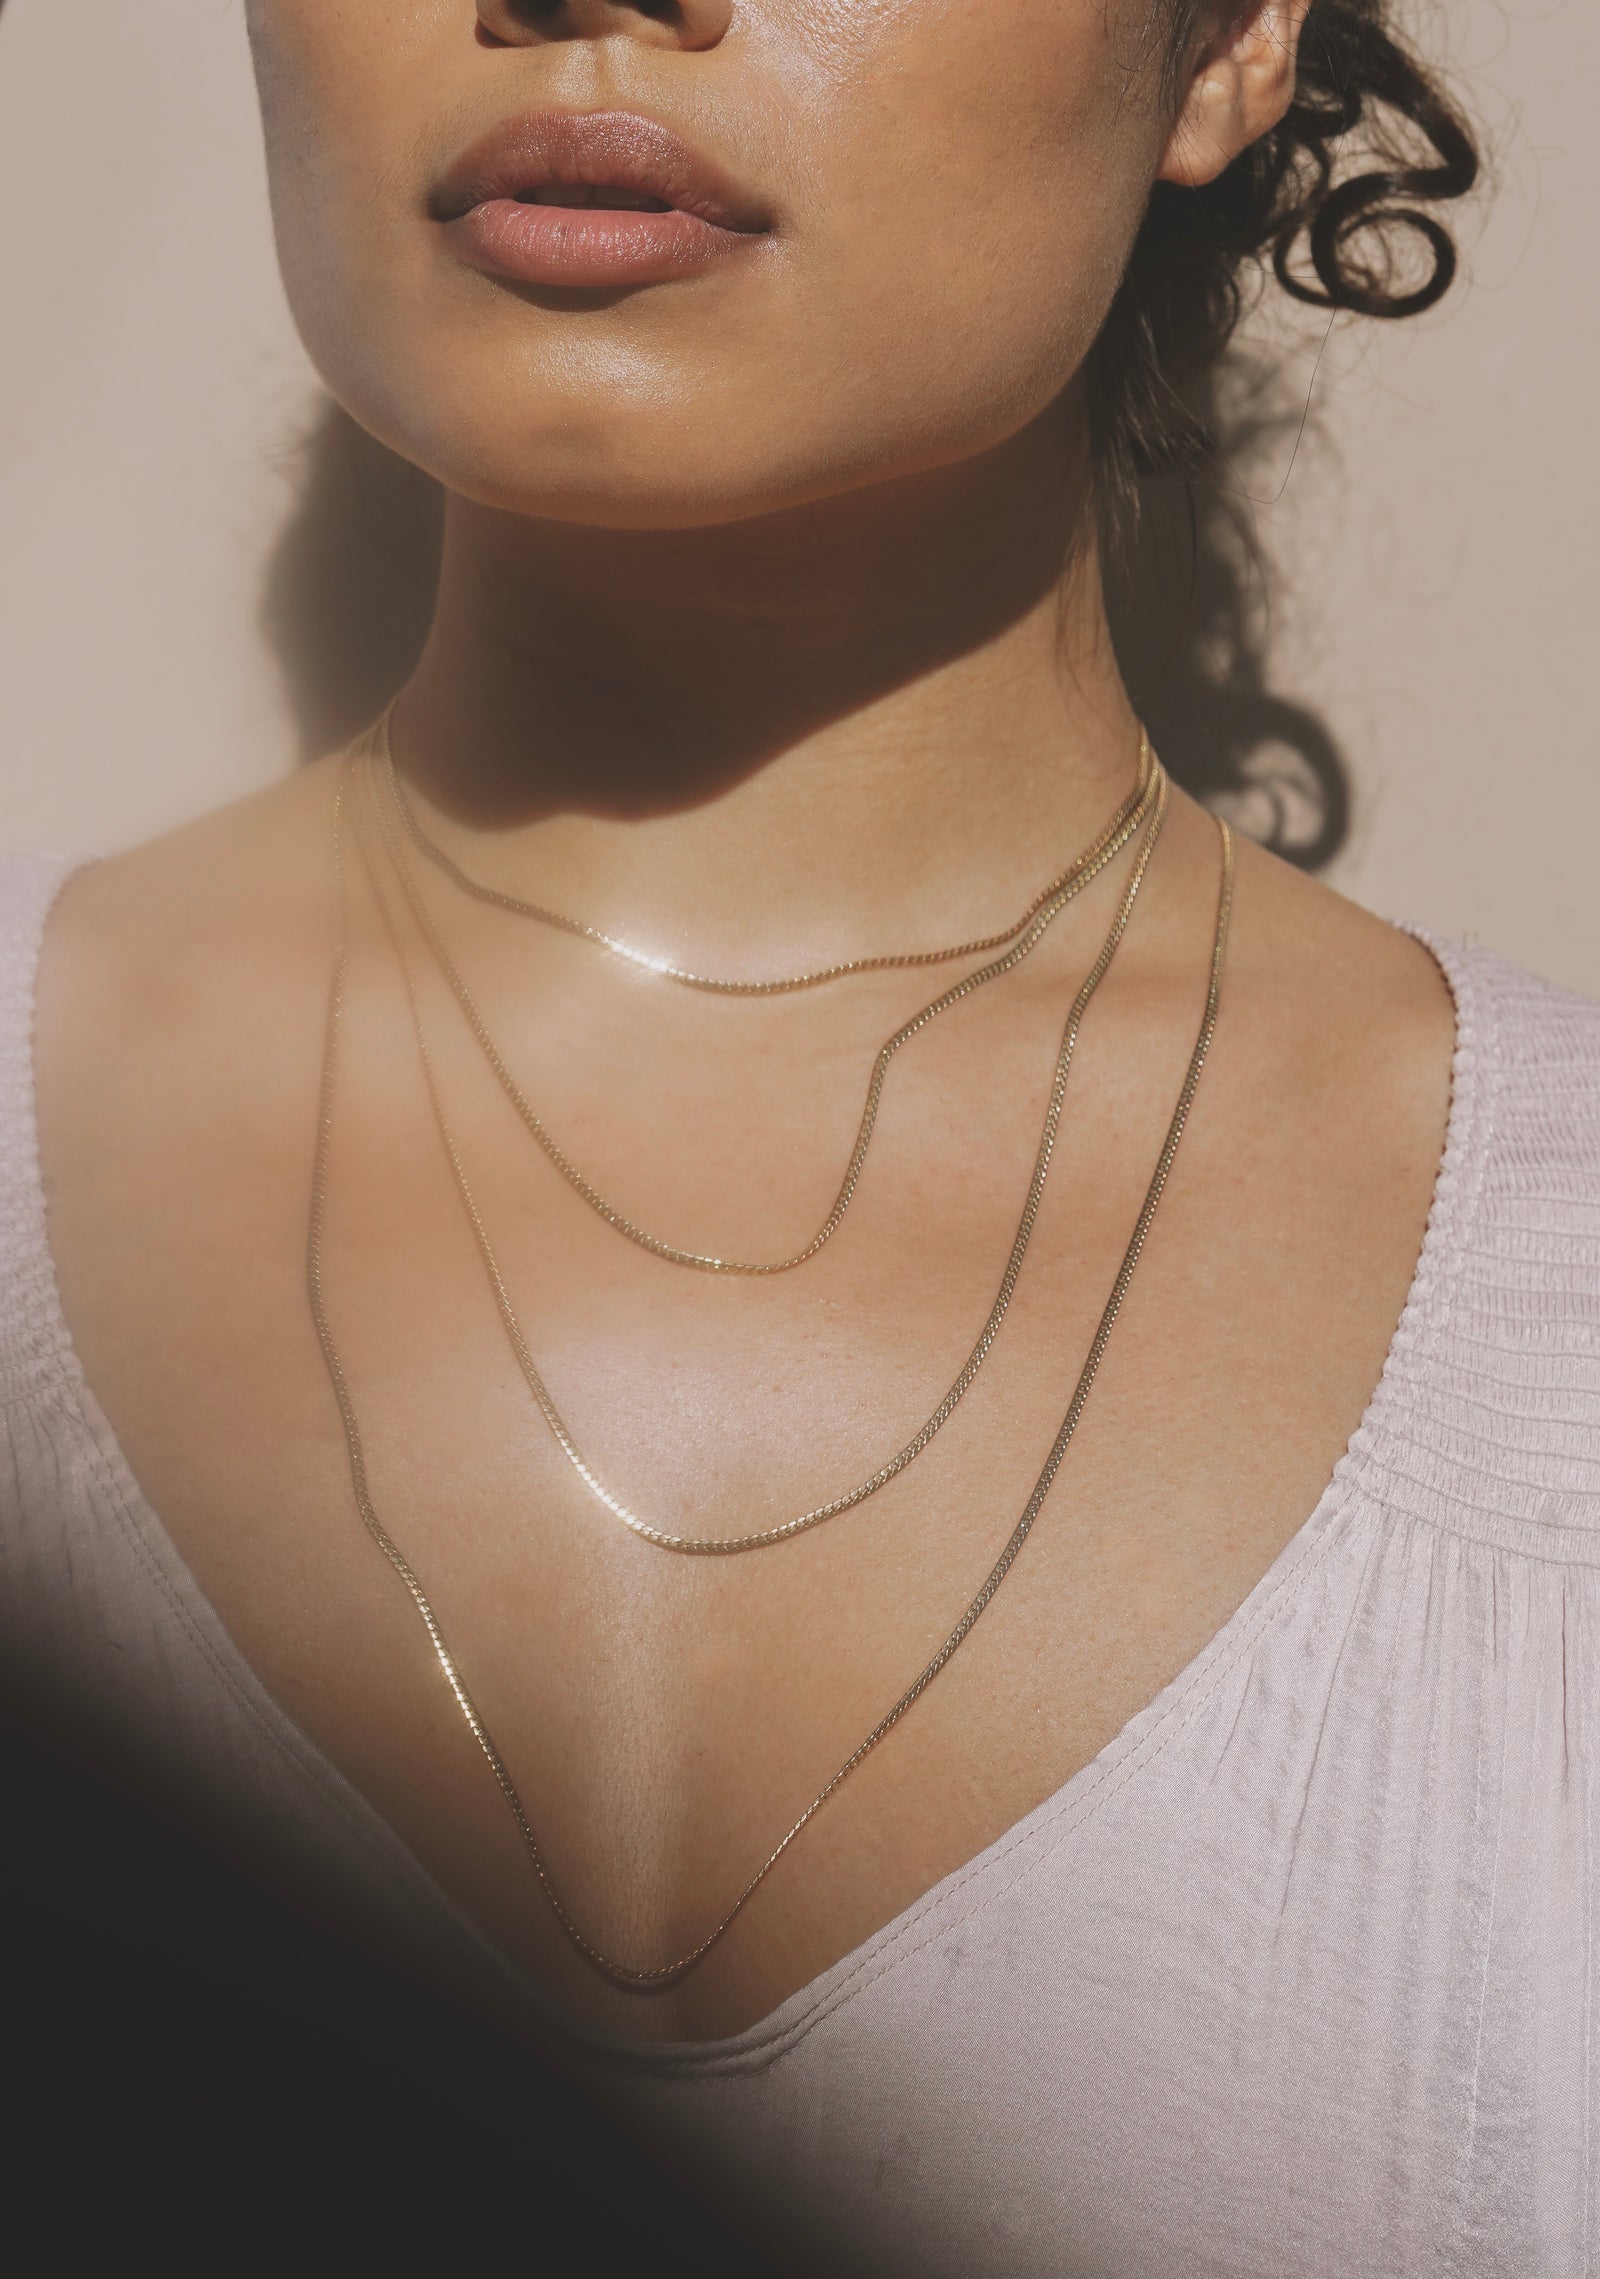 A dramatic flat braided 14kt gold fill chain necklace with fine detail - an elegant addition to any style, a dramatic decor to elevate and inspire. Handmade in the Santa Cruz Mountains.